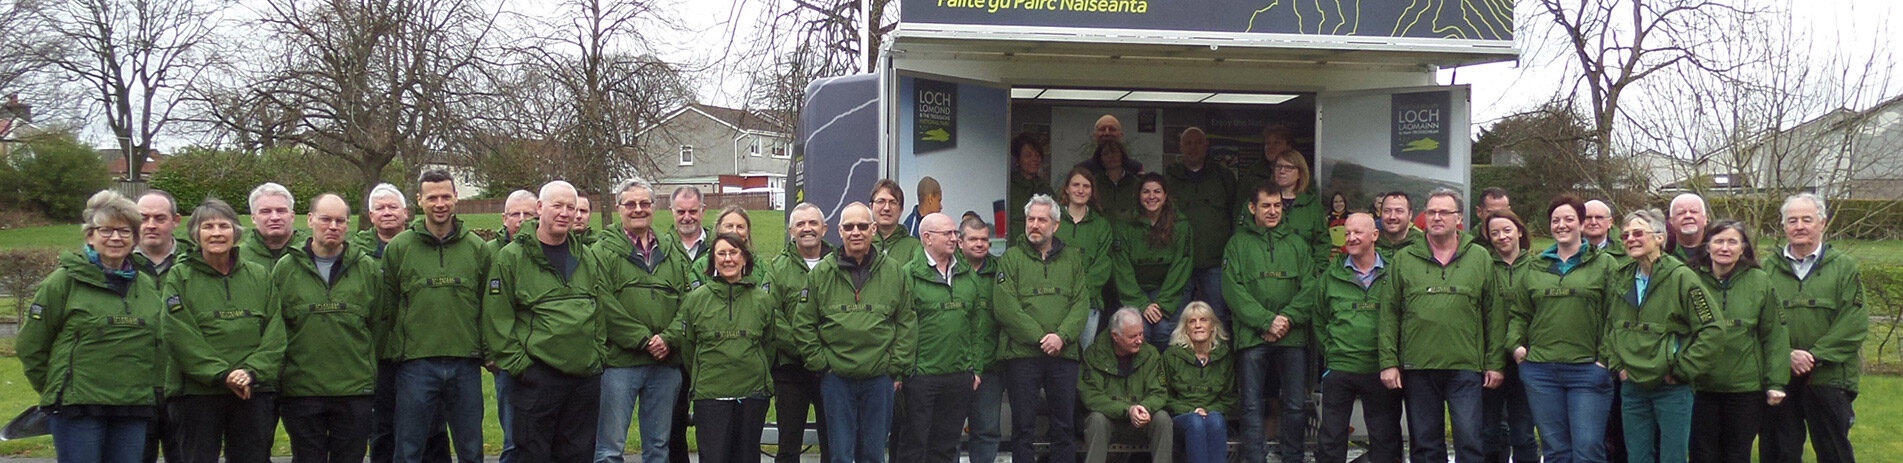 group-of-over-twenty-volunteers-in-green-national-park-jackets-smiling-and-posing